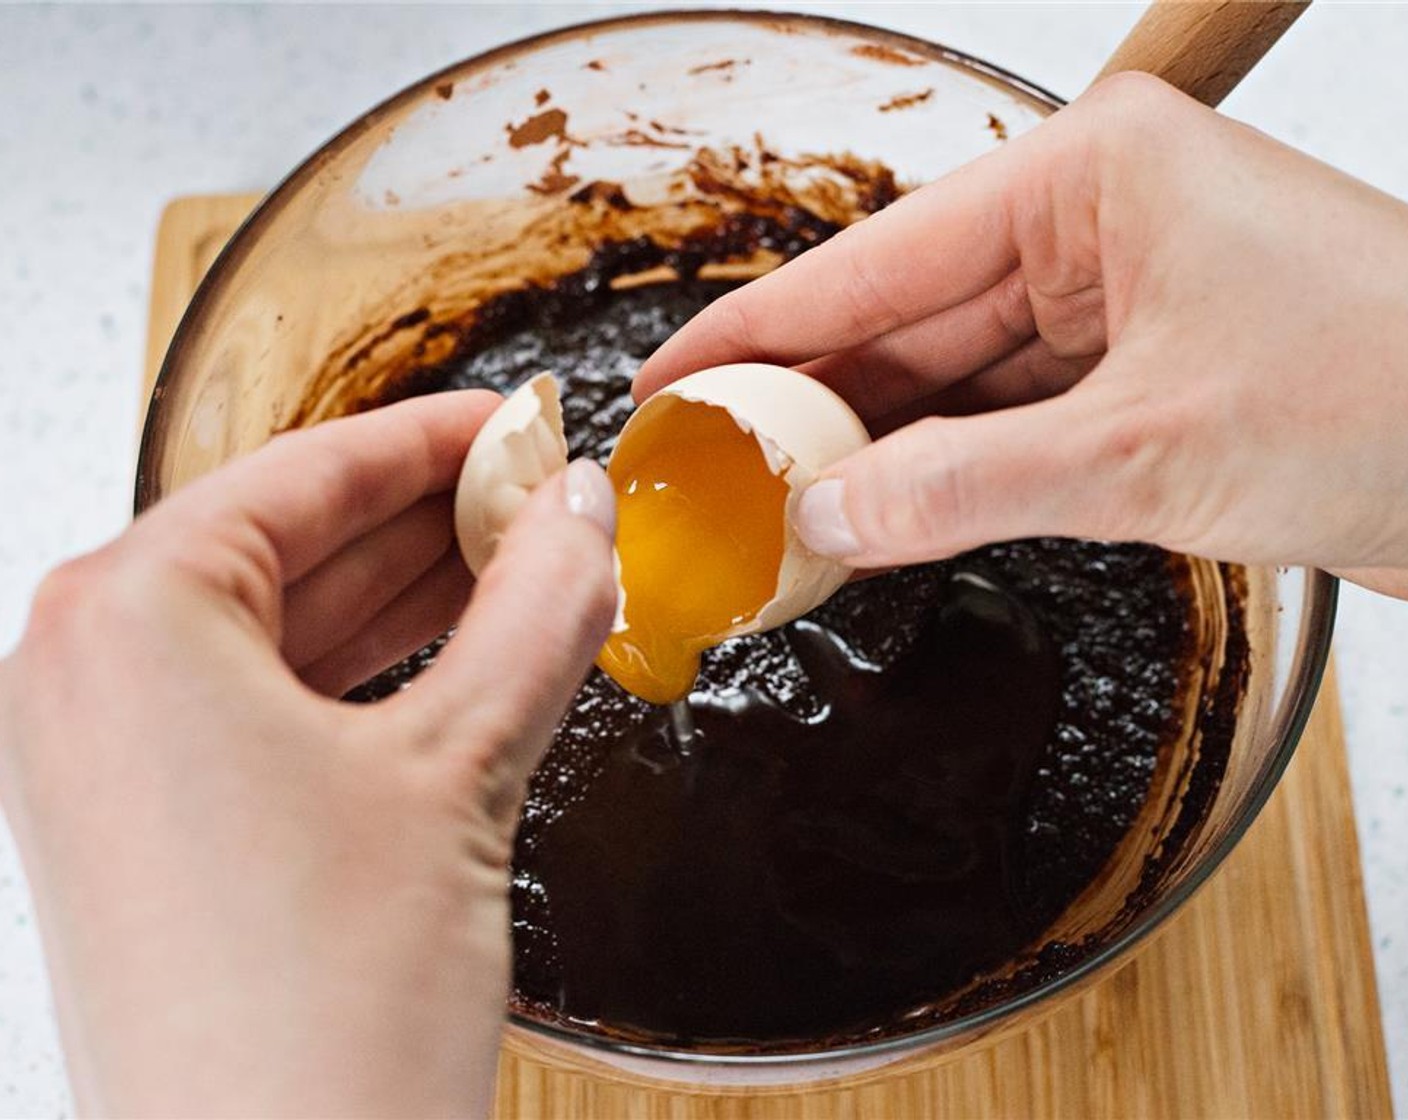 step 7 Add Farmhouse Eggs® Large Brown Eggs (2), one at a time. Stir well to combine.